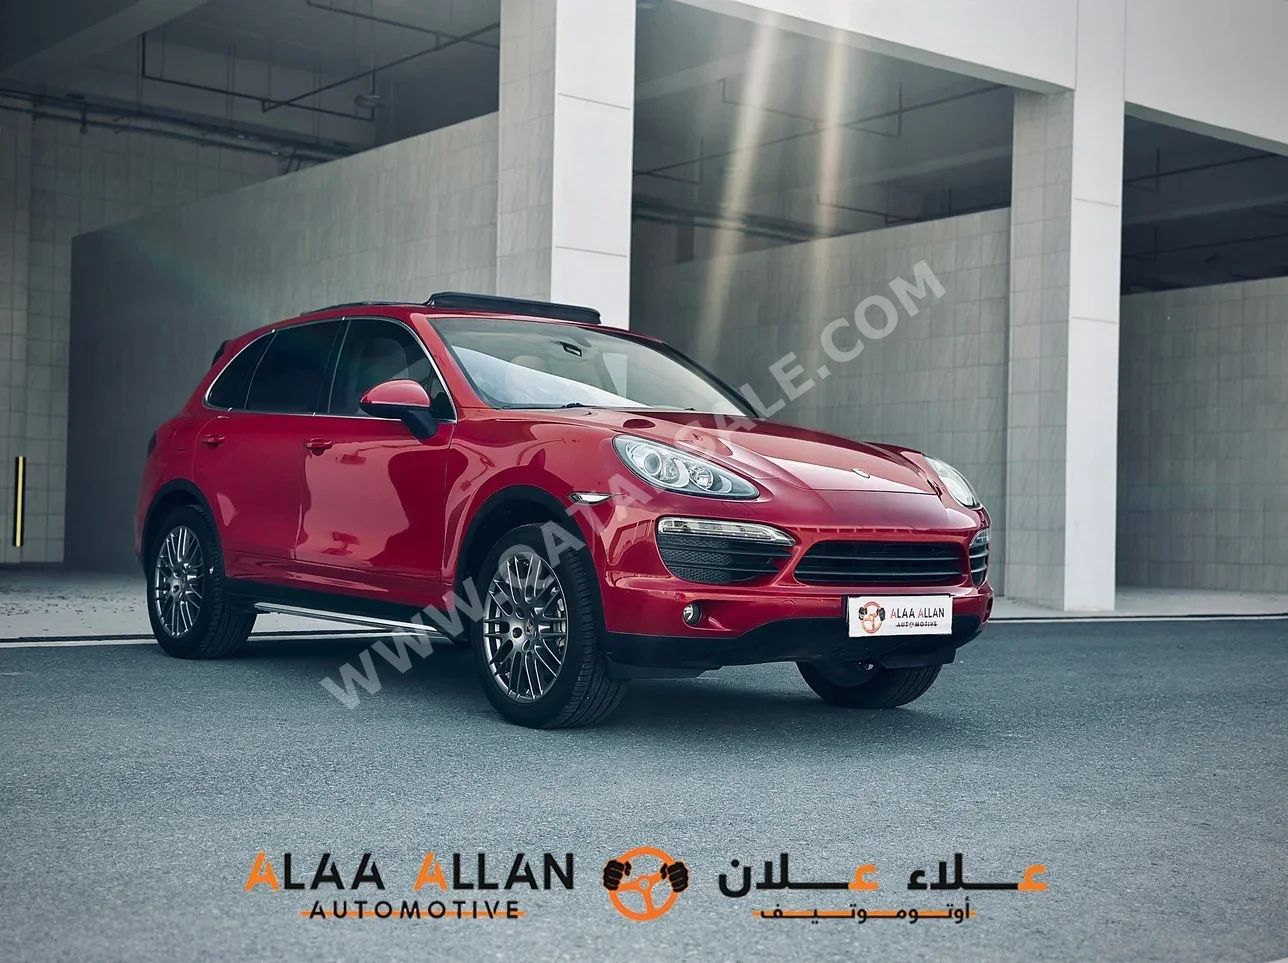 Porsche  Cayenne  S  2014  Automatic  133,000 Km  8 Cylinder  Four Wheel Drive (4WD)  SUV  Red